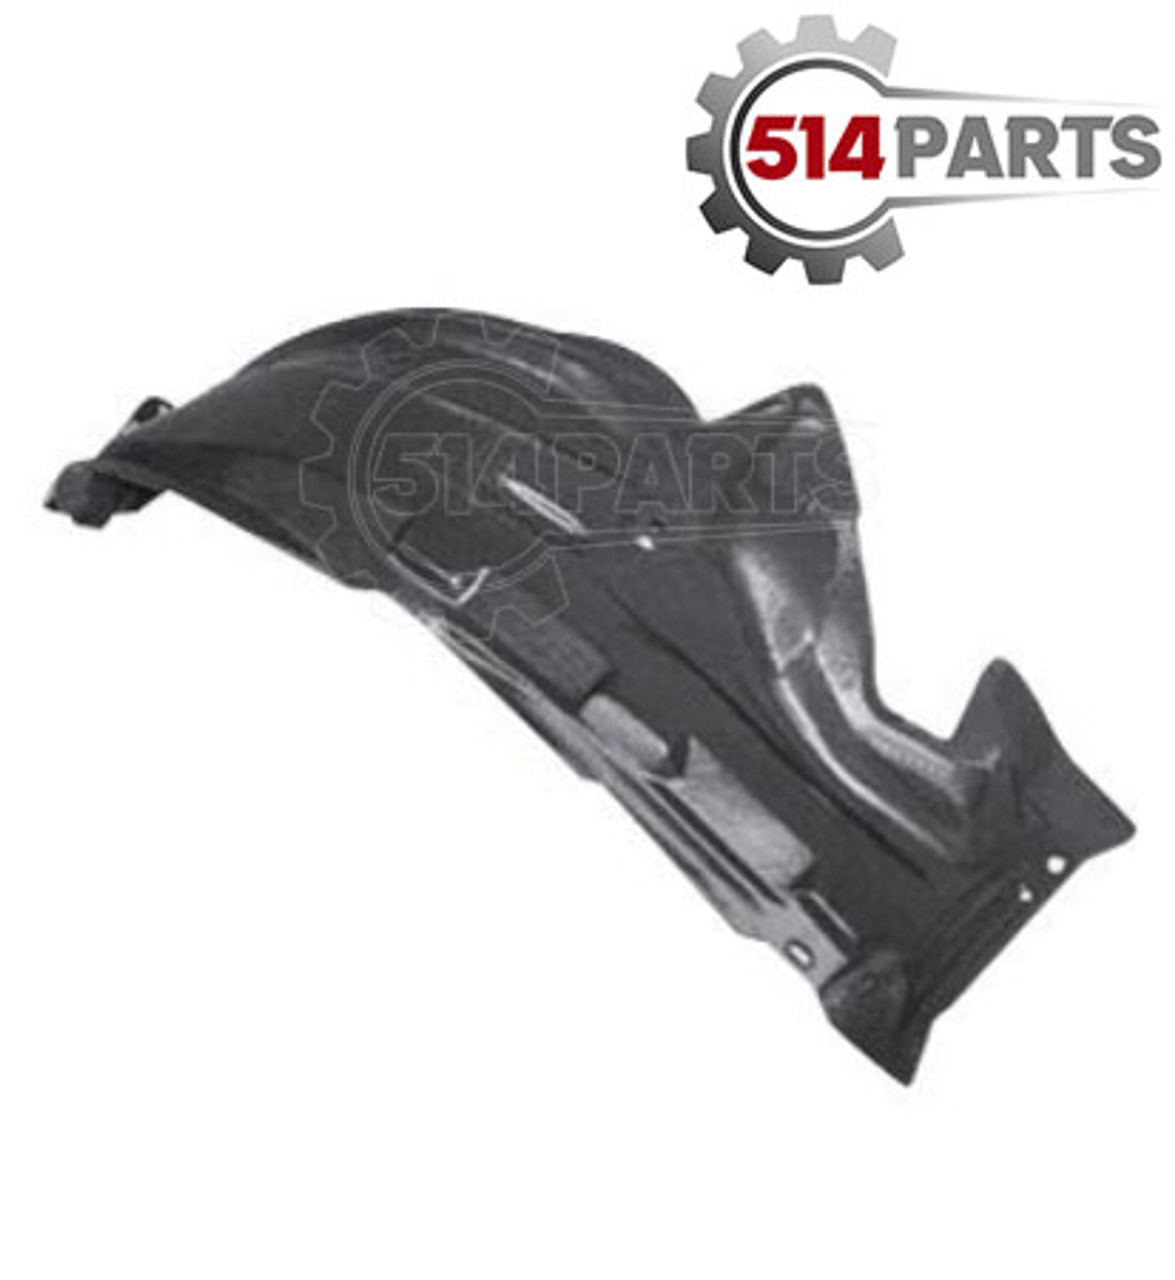 2003 - 2007 NISSAN MURANO FENDER LINER REAR SECTION - FAUSSE AILE SECTION ARRIERE